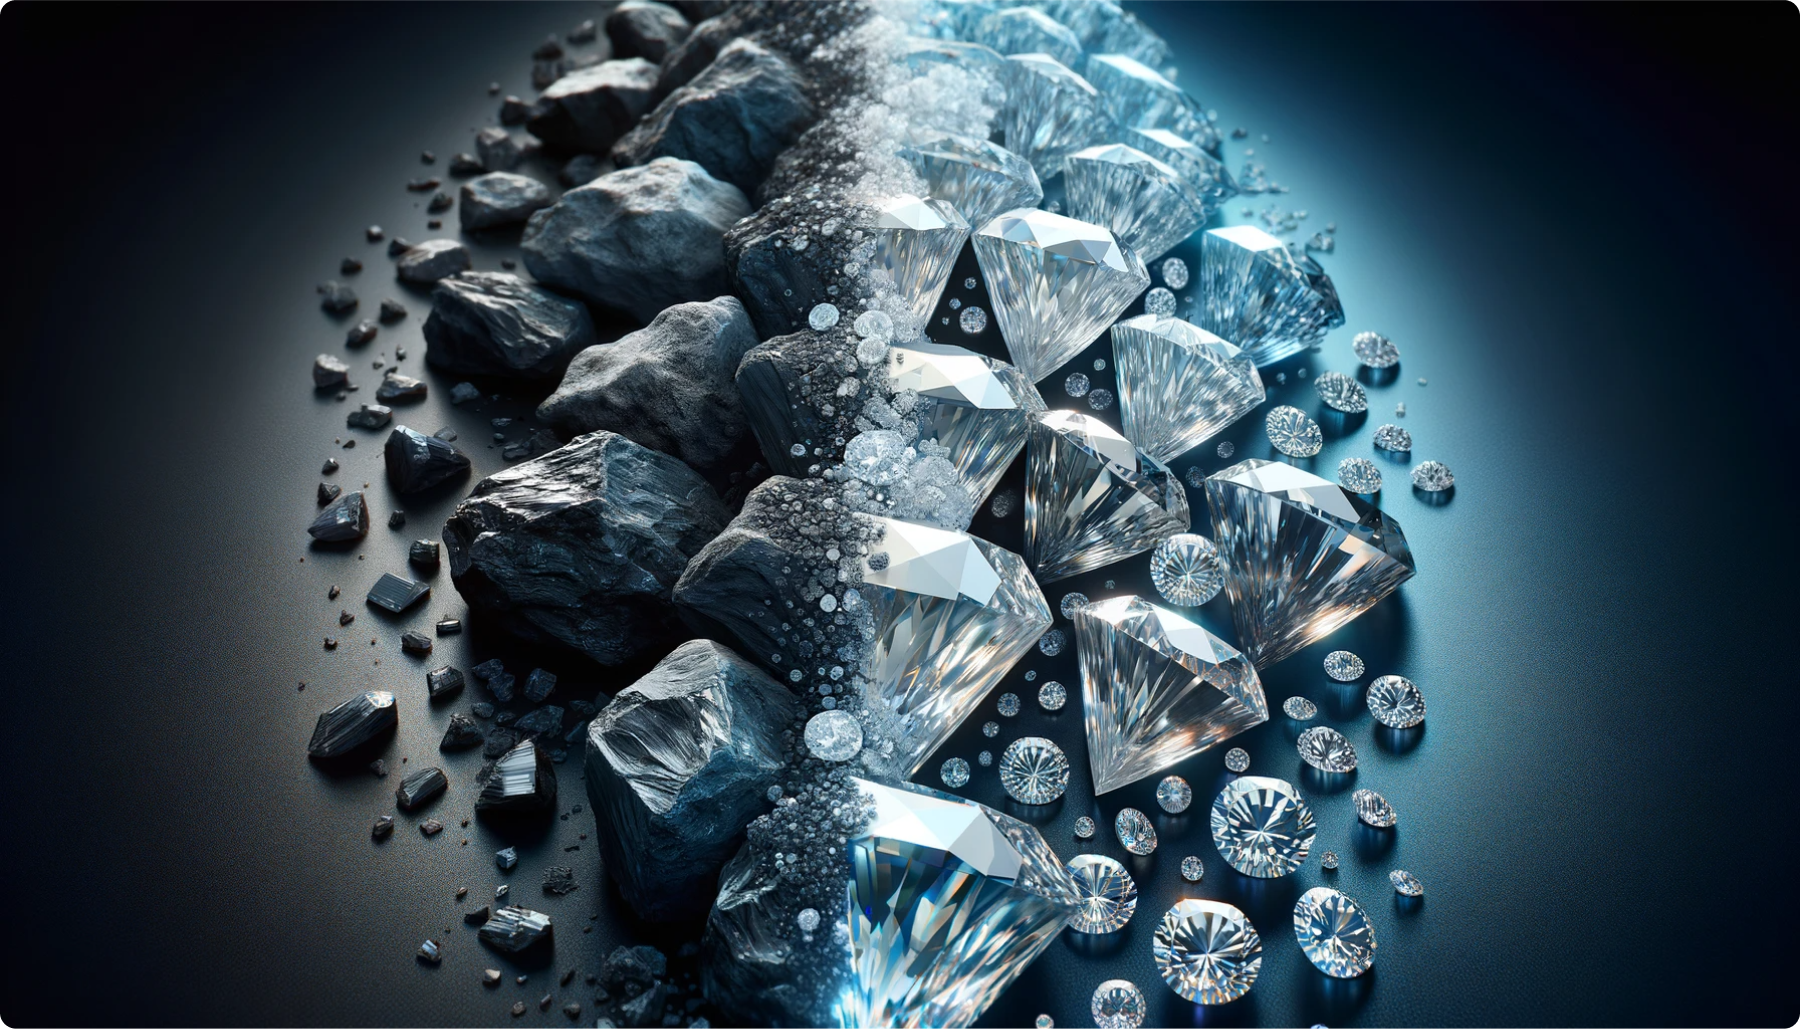 A digitally enhanced photo of diamonds transitioning from rough to polished, symbolizing the investment journey.